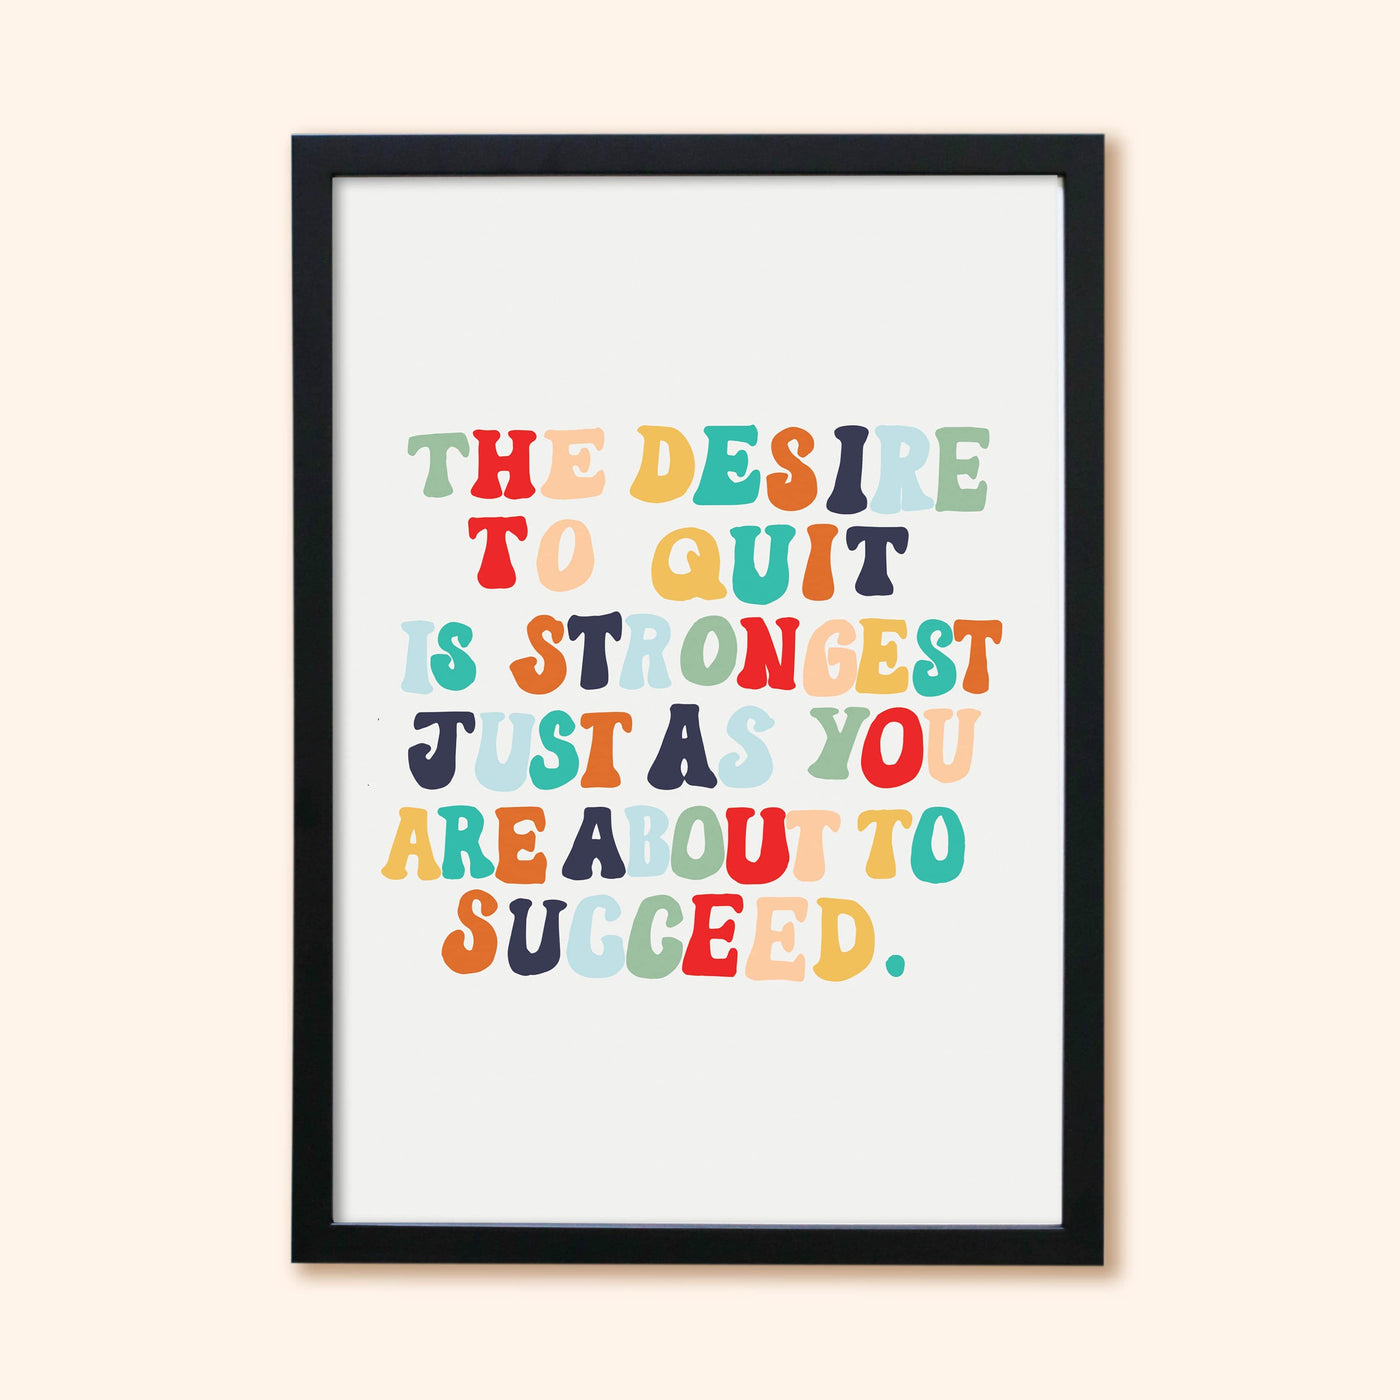 A Hand Lettered Rainbow Typography Motivational Print In A Black Frame - Annie Dornan Smith